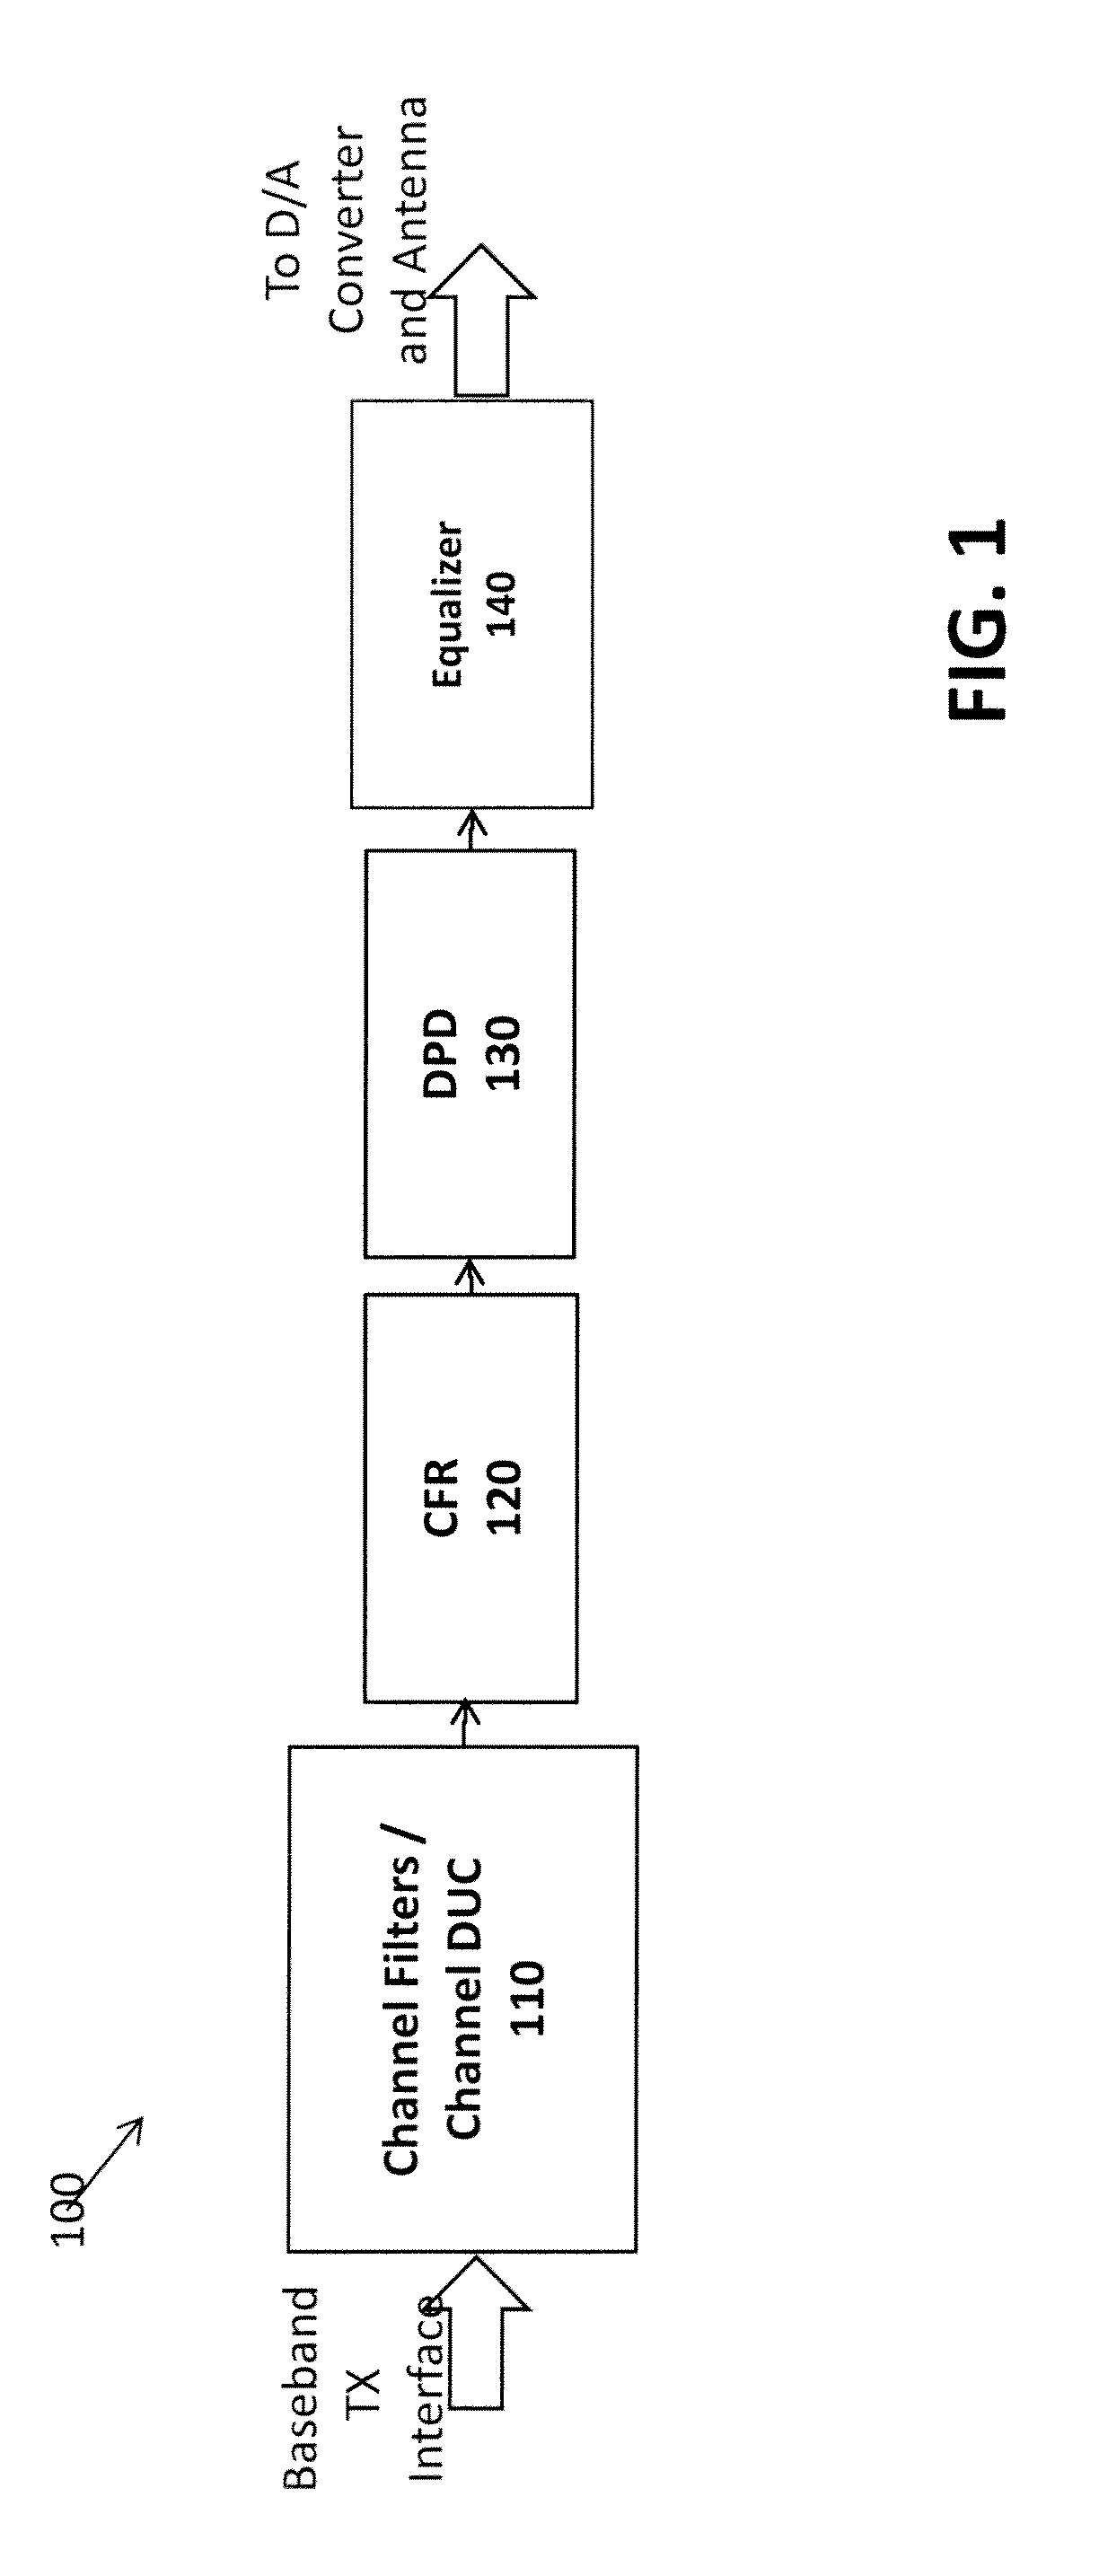 Multi-stage crest factor reduction (CFR) for multi-channel multi-standard radio